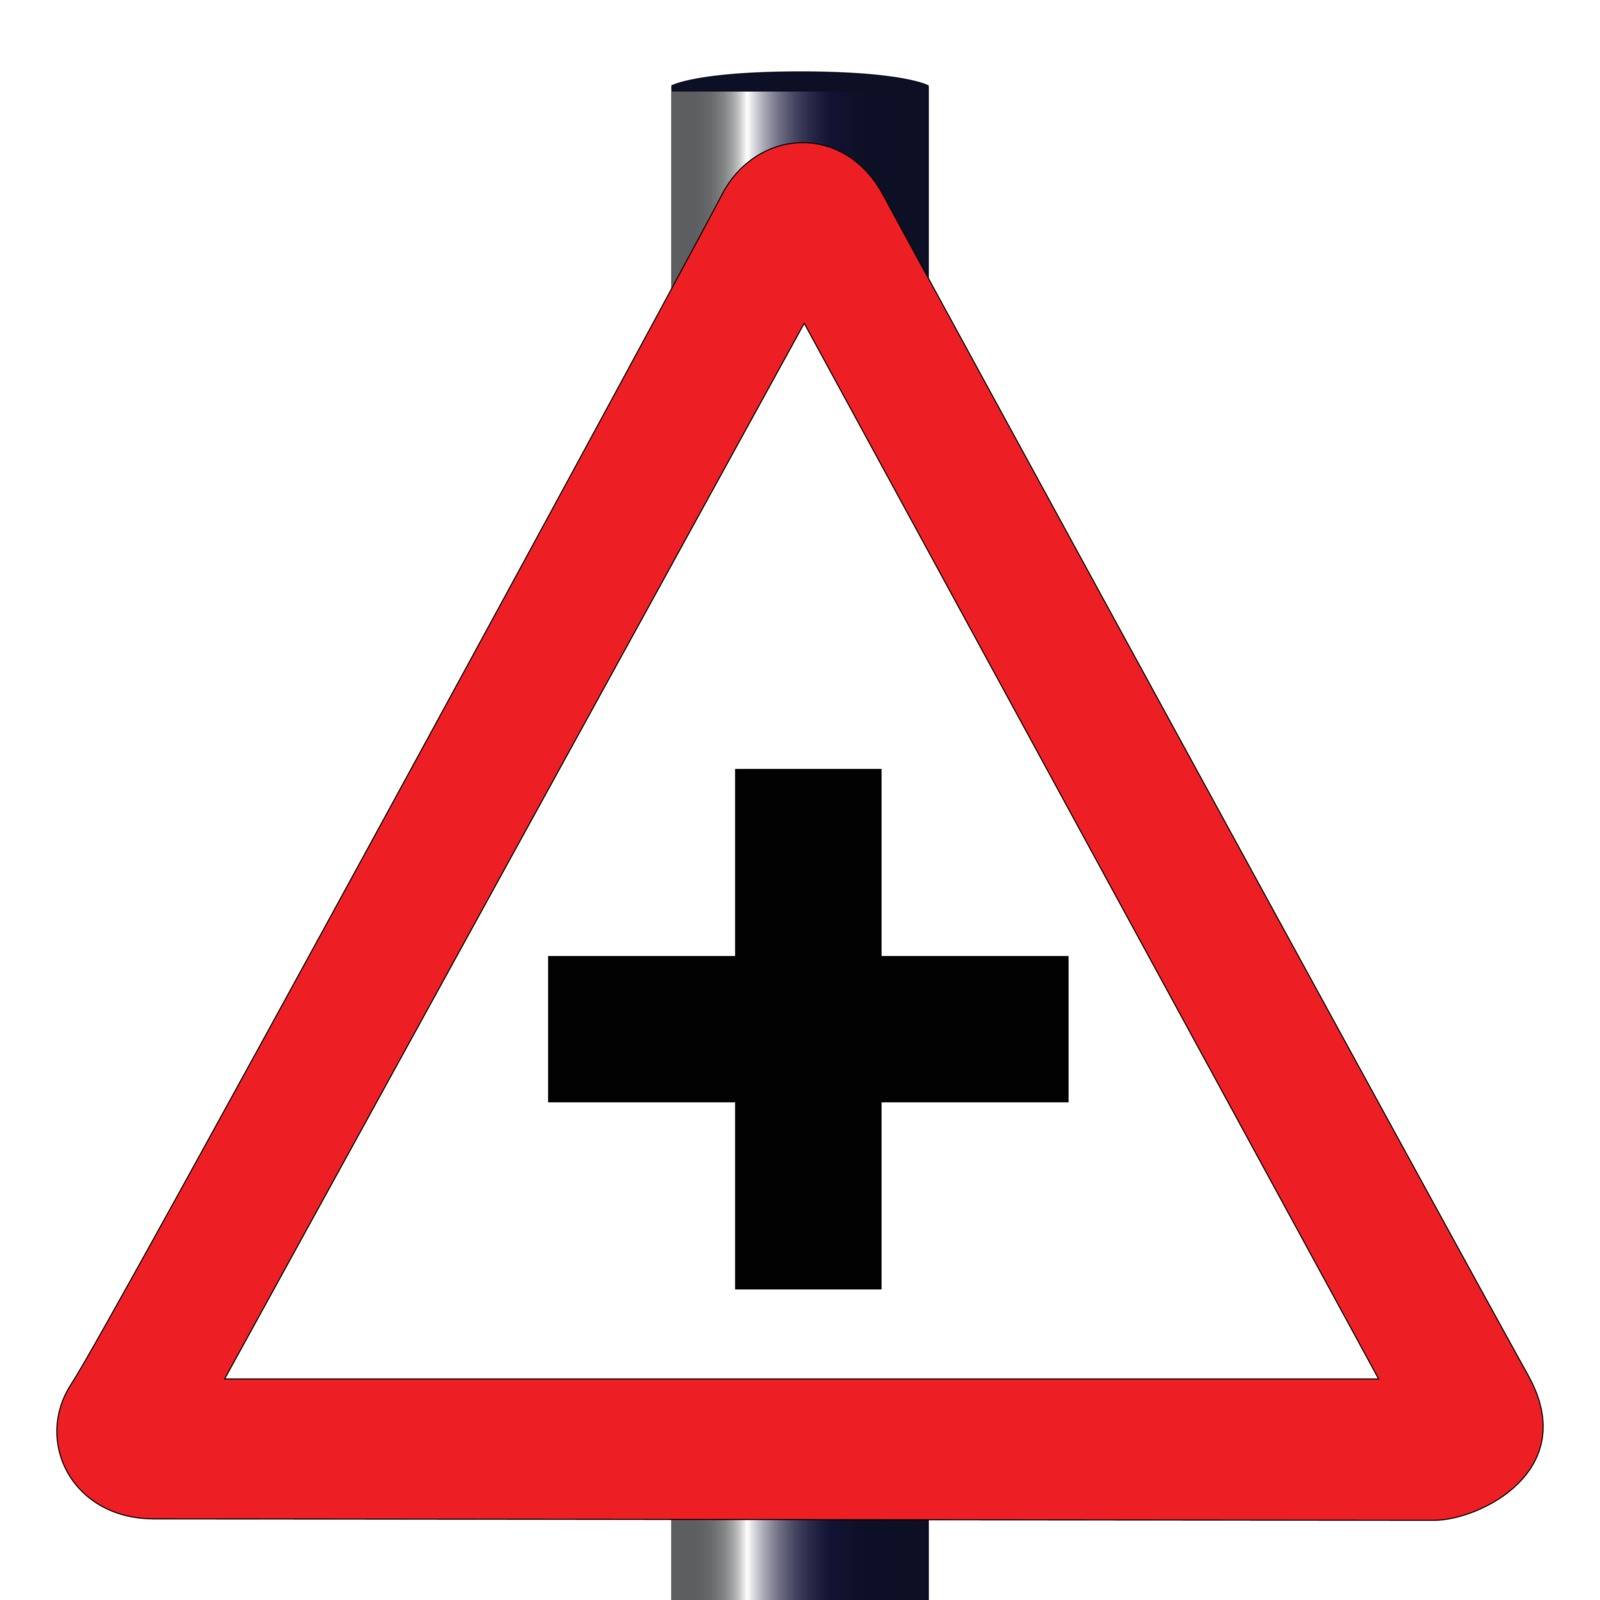 The traditional 'CROSS ROADS' triangle, traffic sign isolated on a white background..